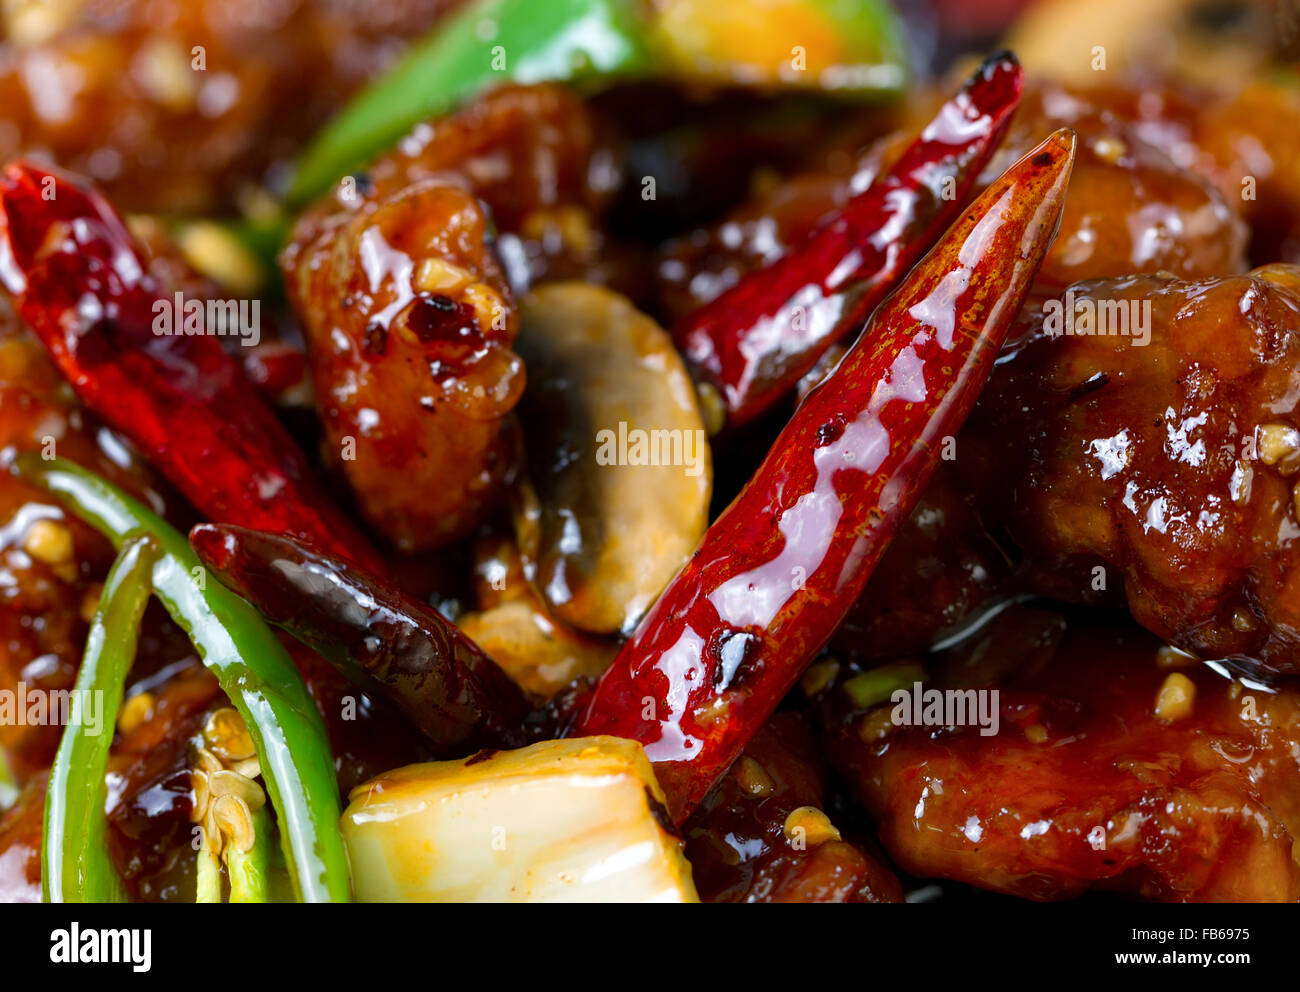 Chinese hot red Chile peppers with chicken and vegetables. Filled frame format with selective focus on front pepper. Stock Photo